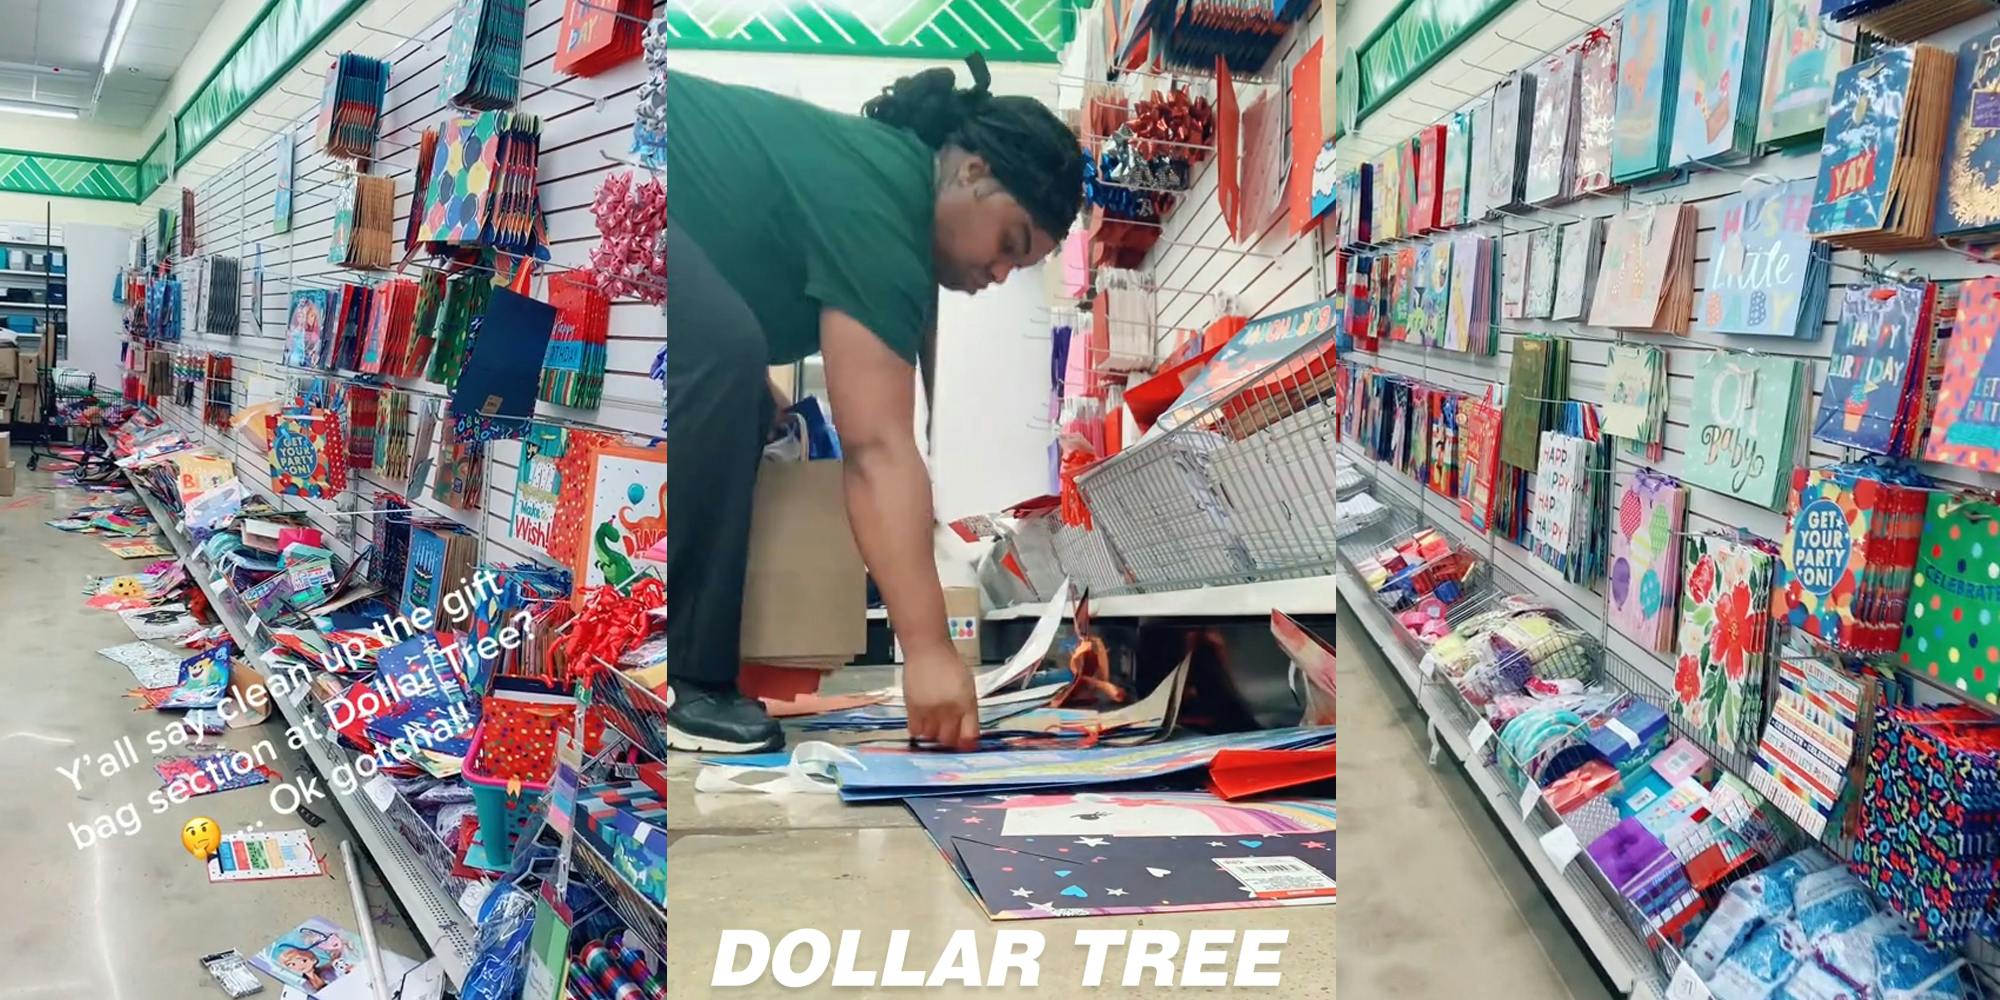 Dollar Deals & Party Supplies Store - Dollar Store in Dallas